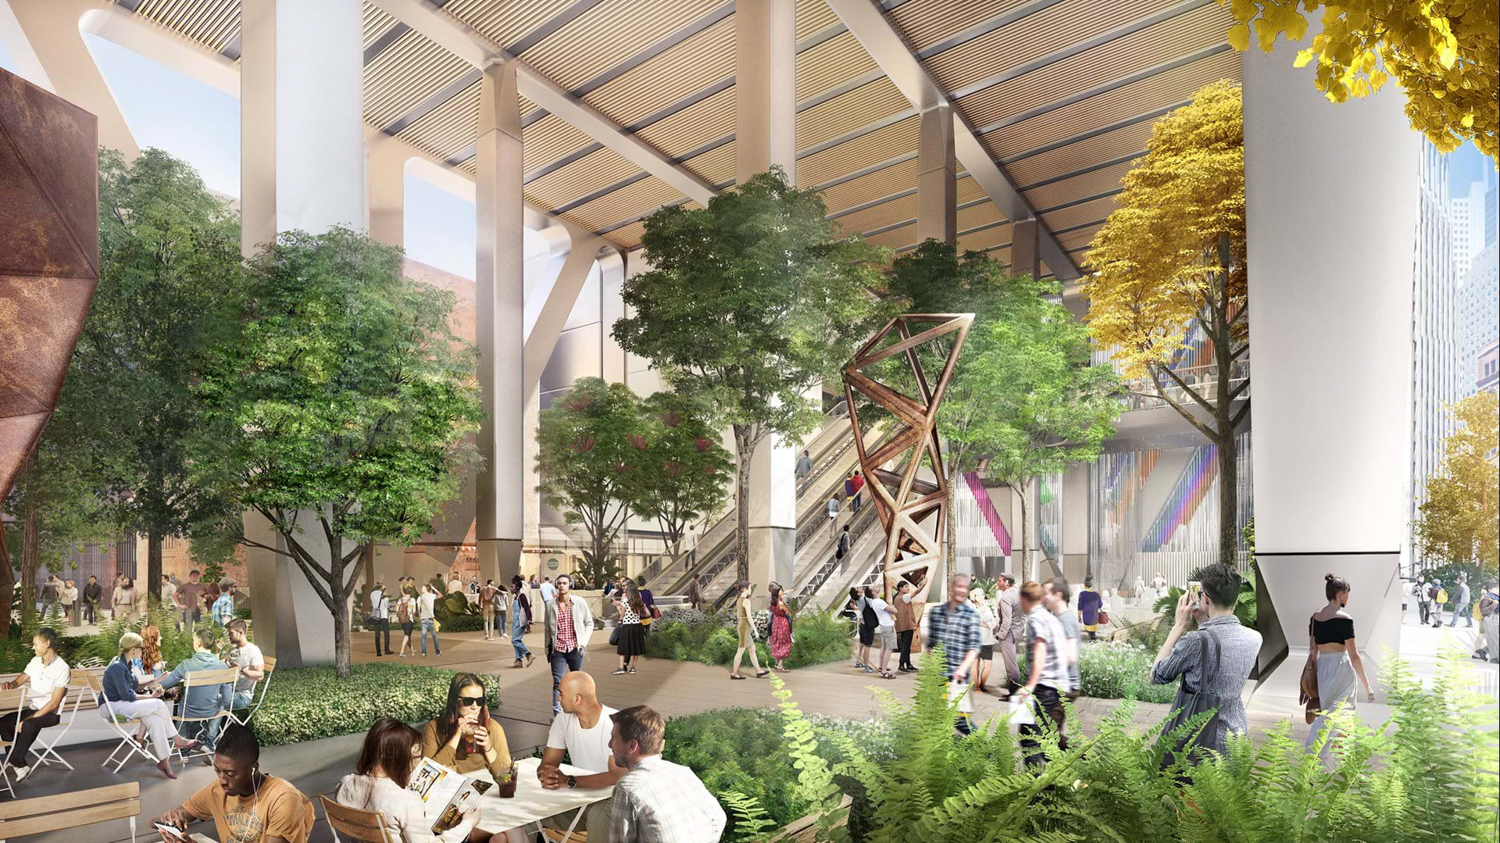 Oceanwide Center public plaza with seating, trees, and sculptures, rendering of design by Foster and Partners